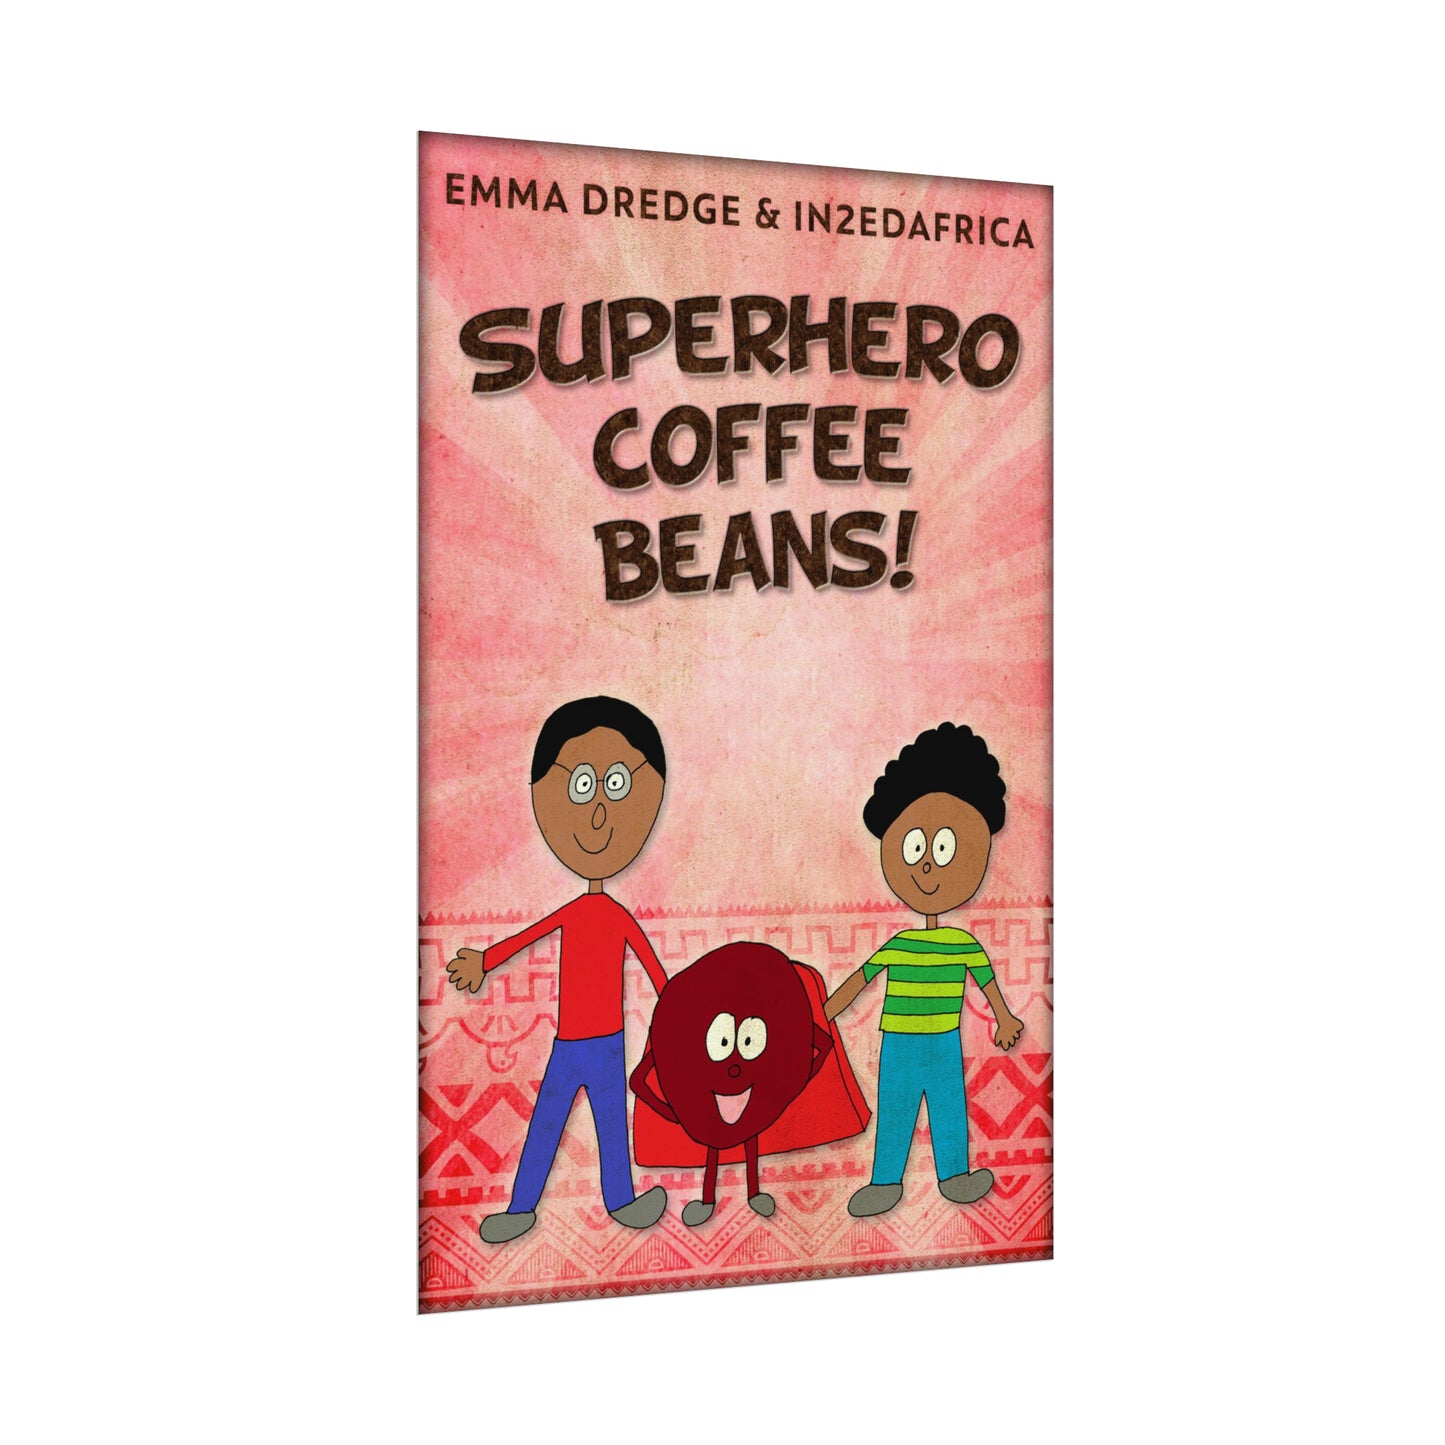 Superhero Coffee Beans! - Rolled Poster